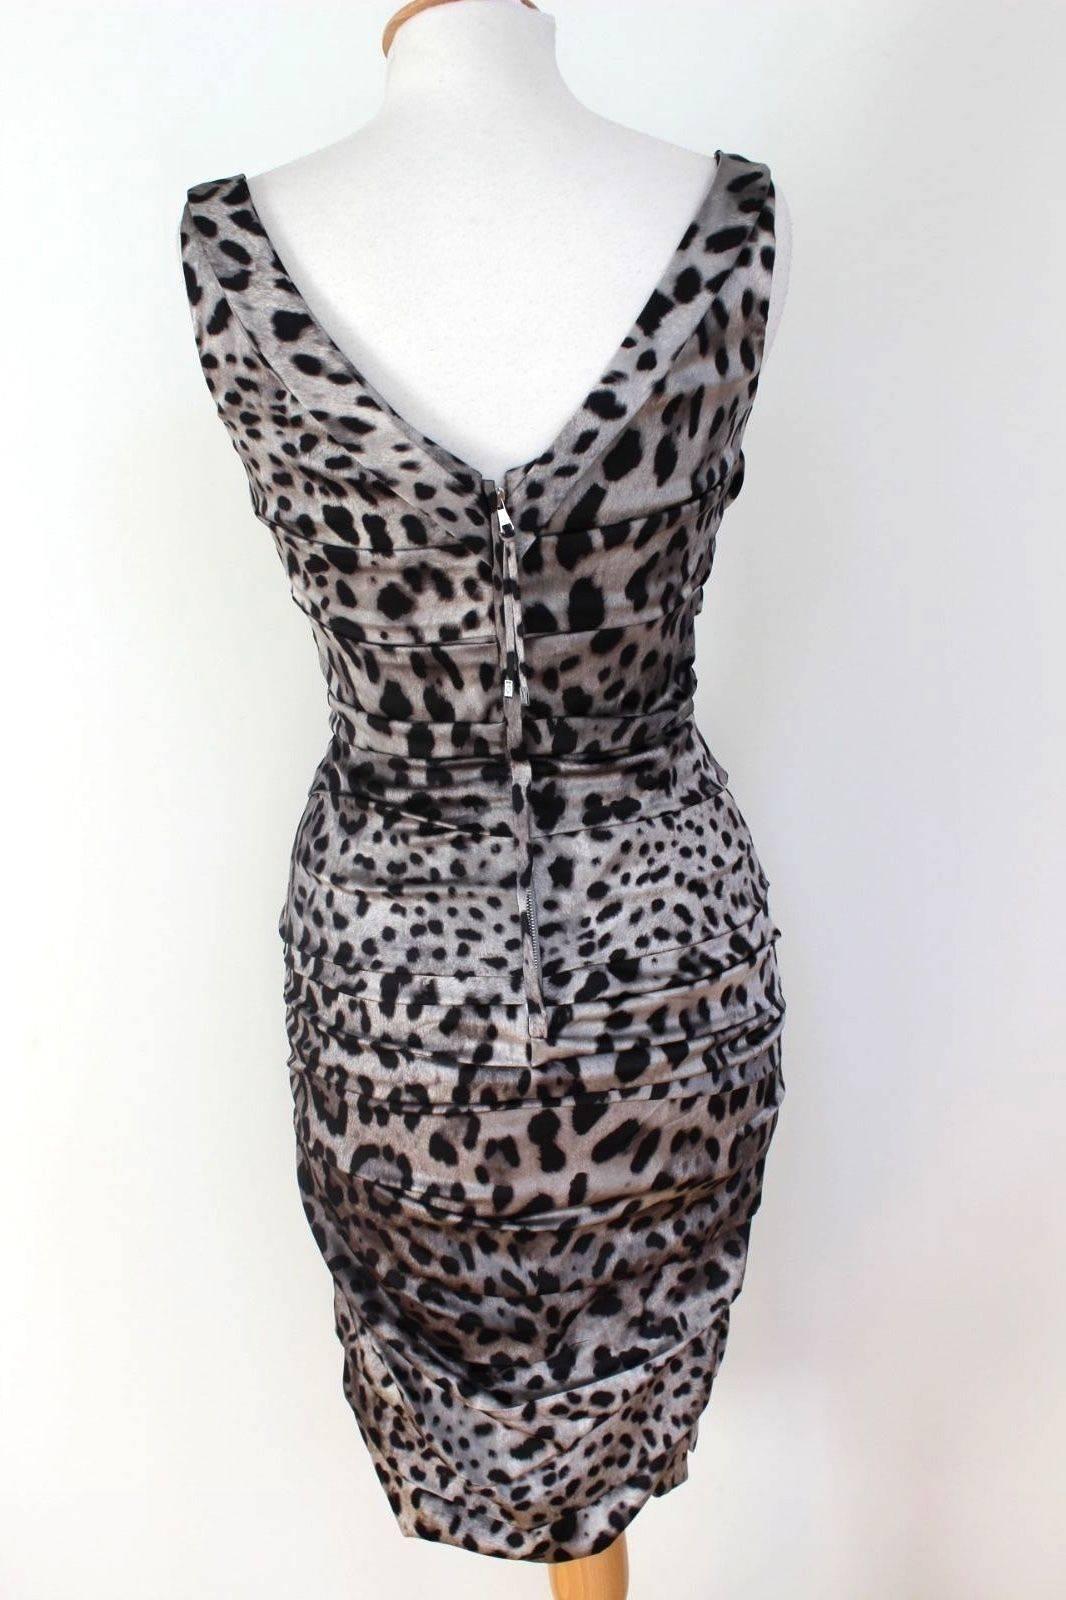 Dolce & Gabbana Black Grey Ruched Stretch Leopard Dress 40 uk 8 

Dolce and Gabbana epitomises high glamour, femininity and va-va-voom. 

As seen on countless celebrities

Make a powerful party statement in this slinky, figure-hugging leopard